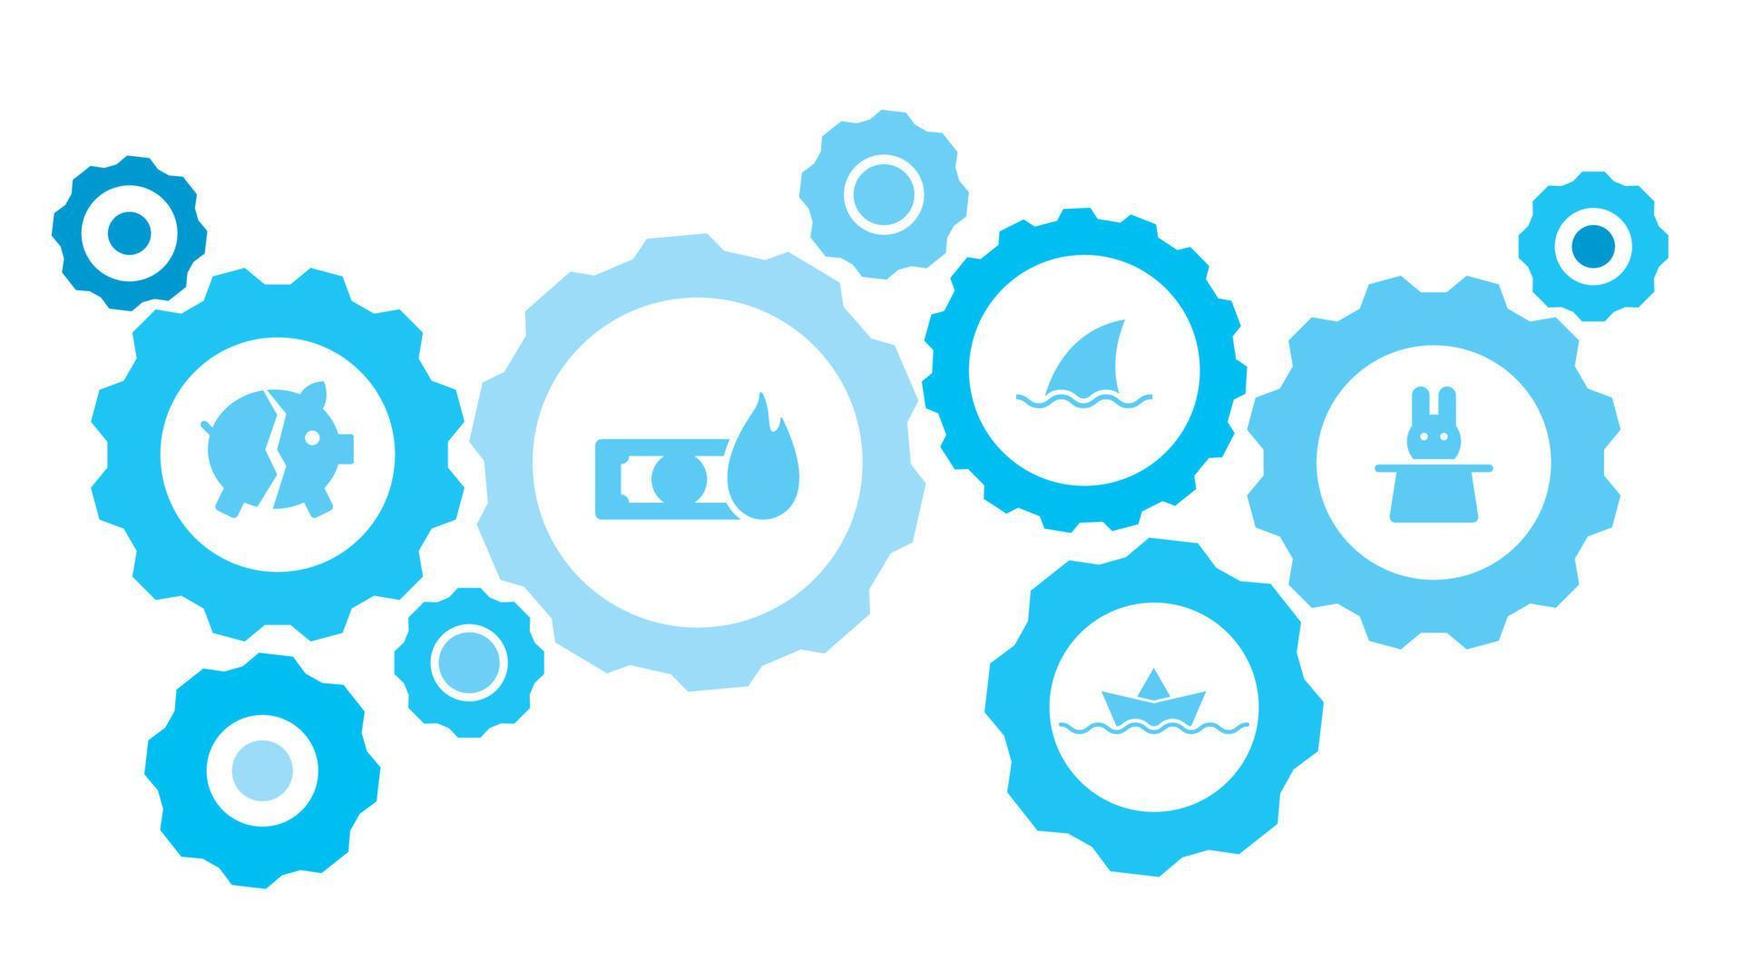 Connected gears and vector icons for logistic, service, shipping, distribution, transport, market, communicate concepts. Ballot, electronic gear blue icon set on white background